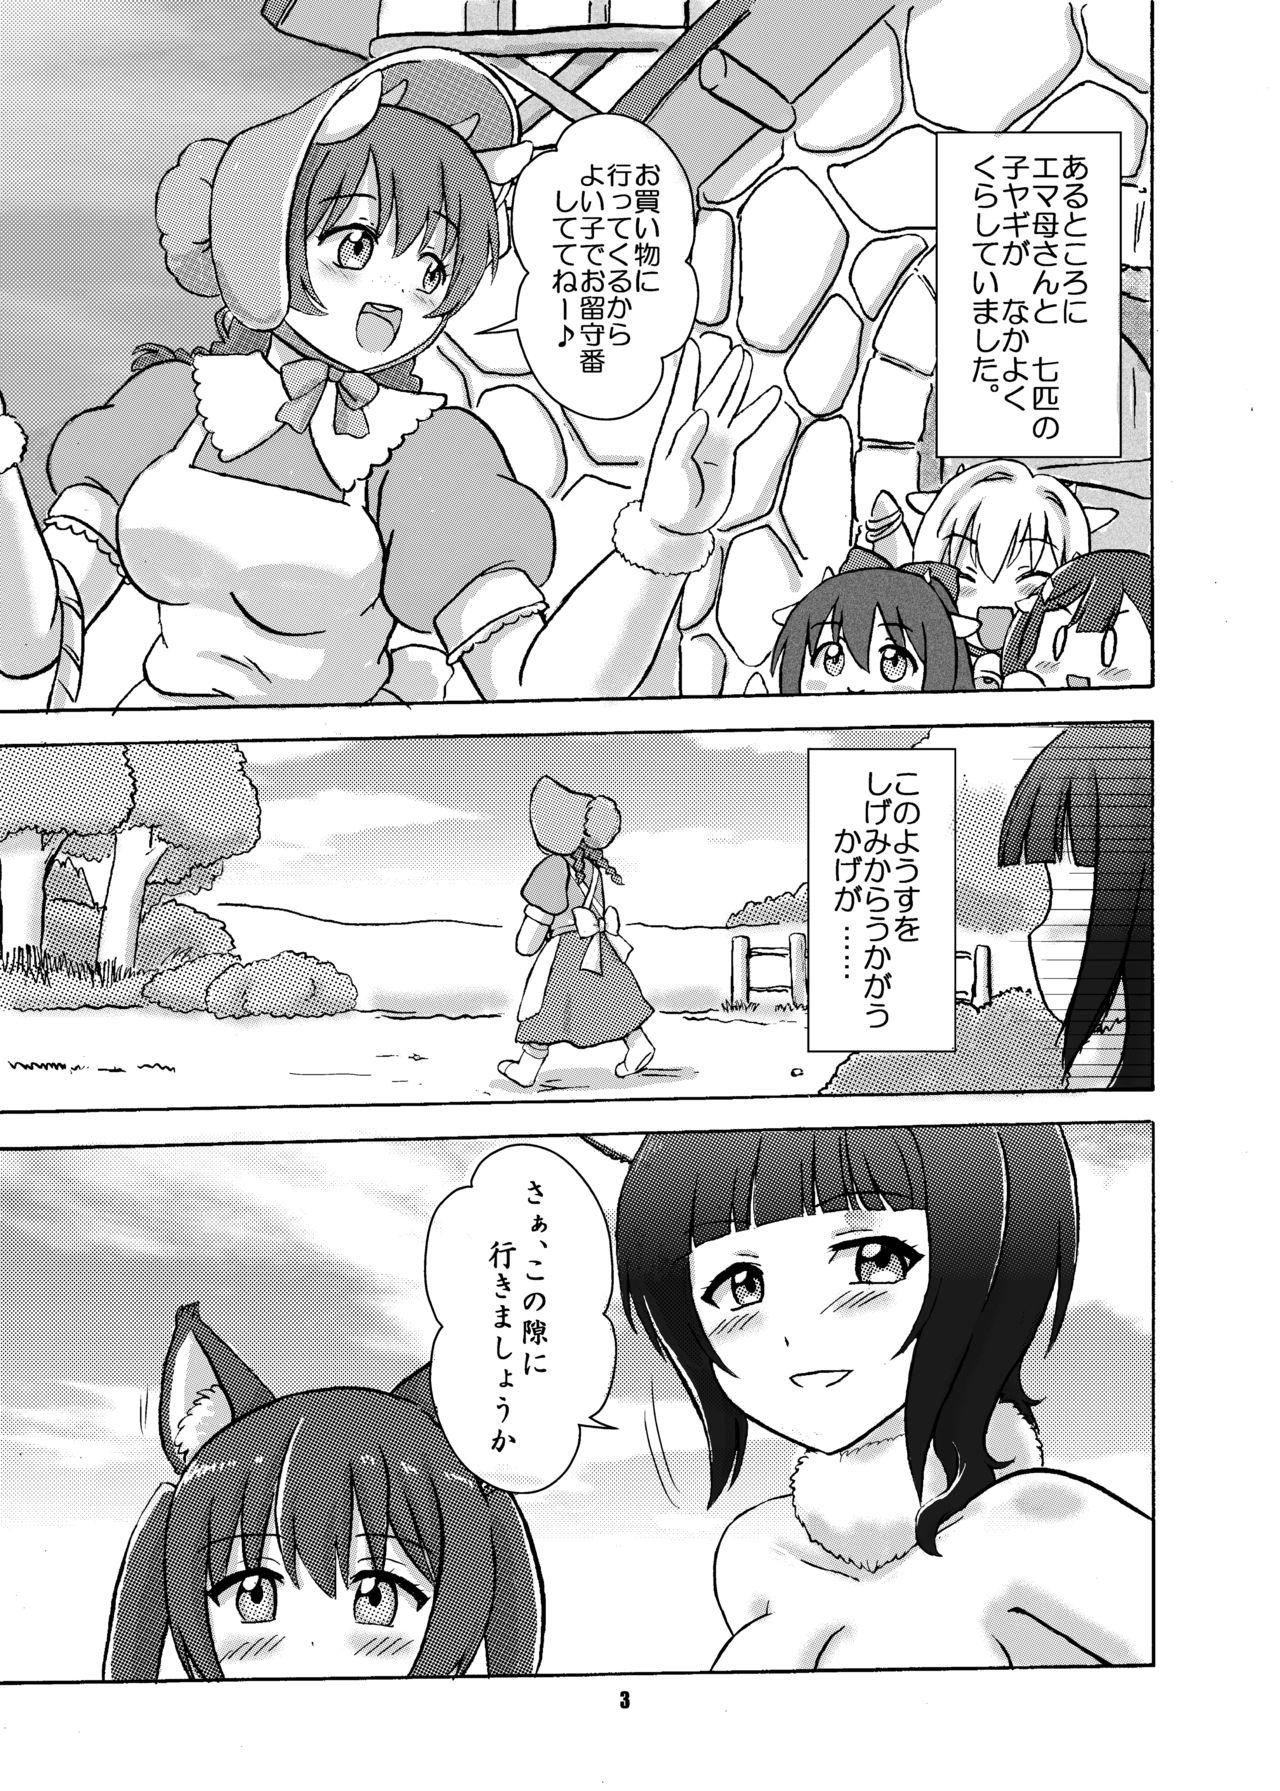 Matures Wolf and Seven Goats - Love live Anale - Page 2